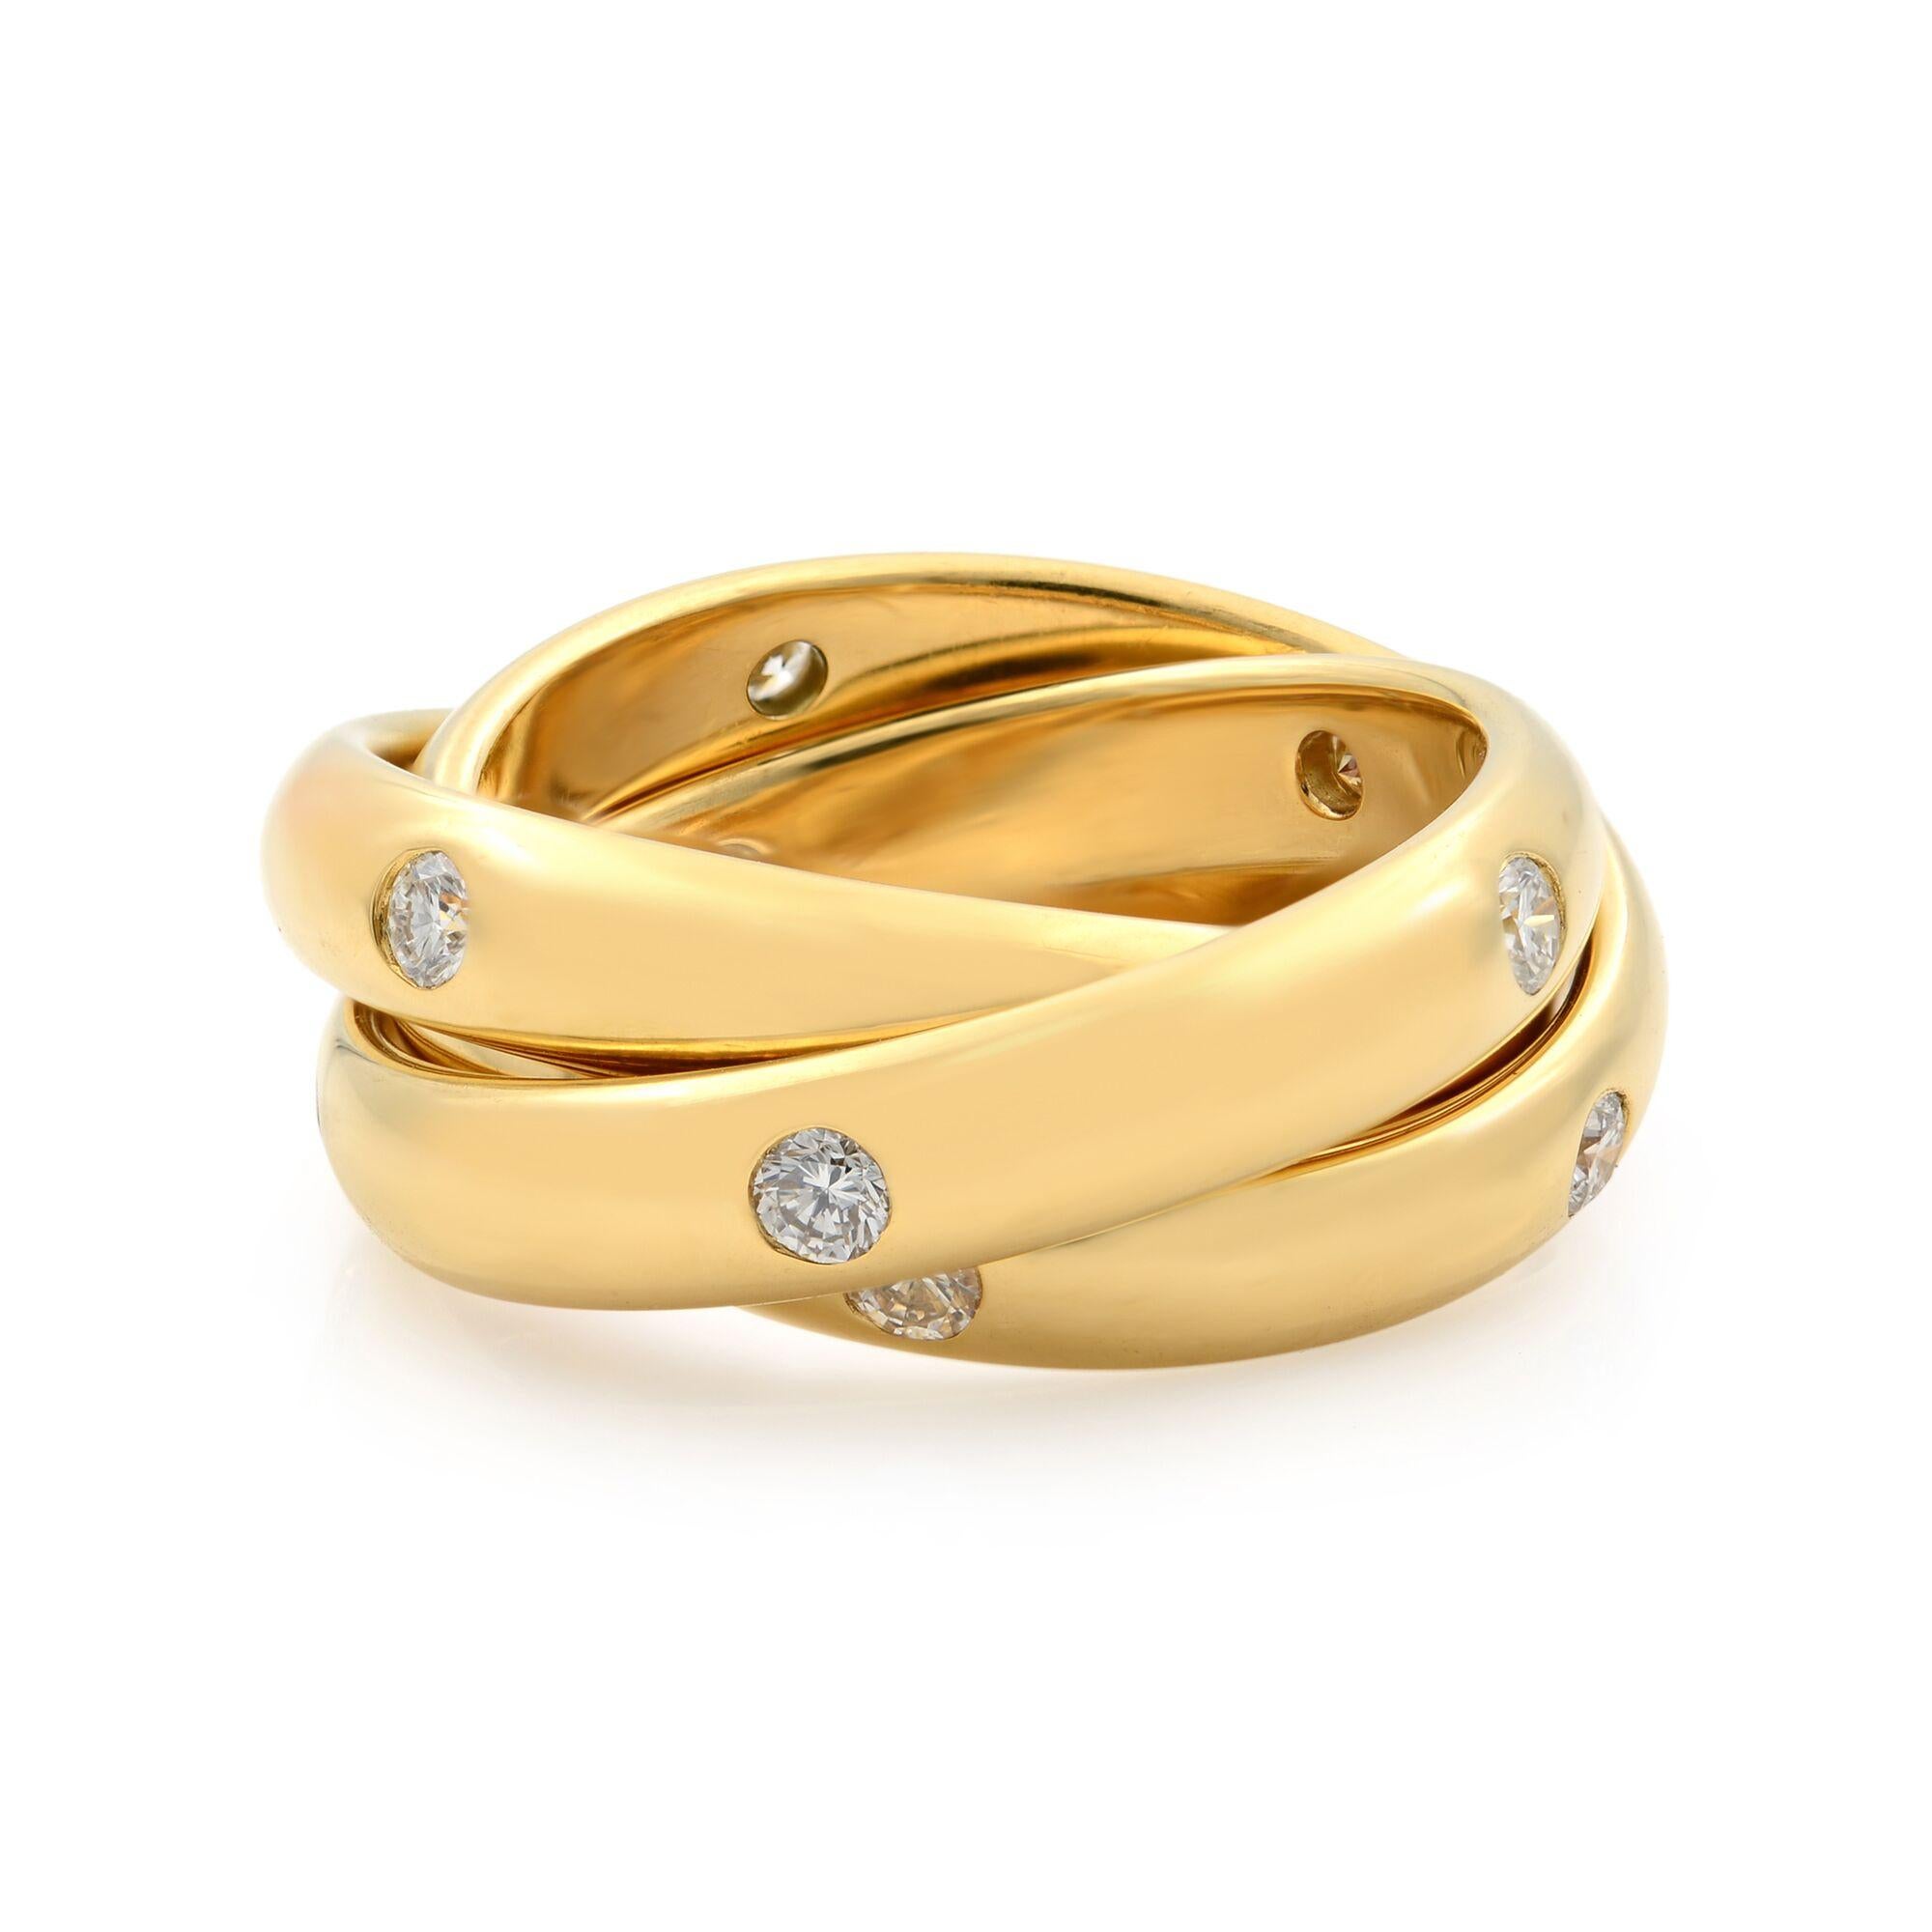 Vintage Cartier Trinity ring in 18 karat yellow gold and diamonds.
15 Round Cut Diamonds of F-G color and VS Clarity.
Each band is 4 mm.
Total Carat Weight: 0.45.
Stamped inside. Size 52 US 6.
Condition: Pre-owned, looks great. No signs of wear.